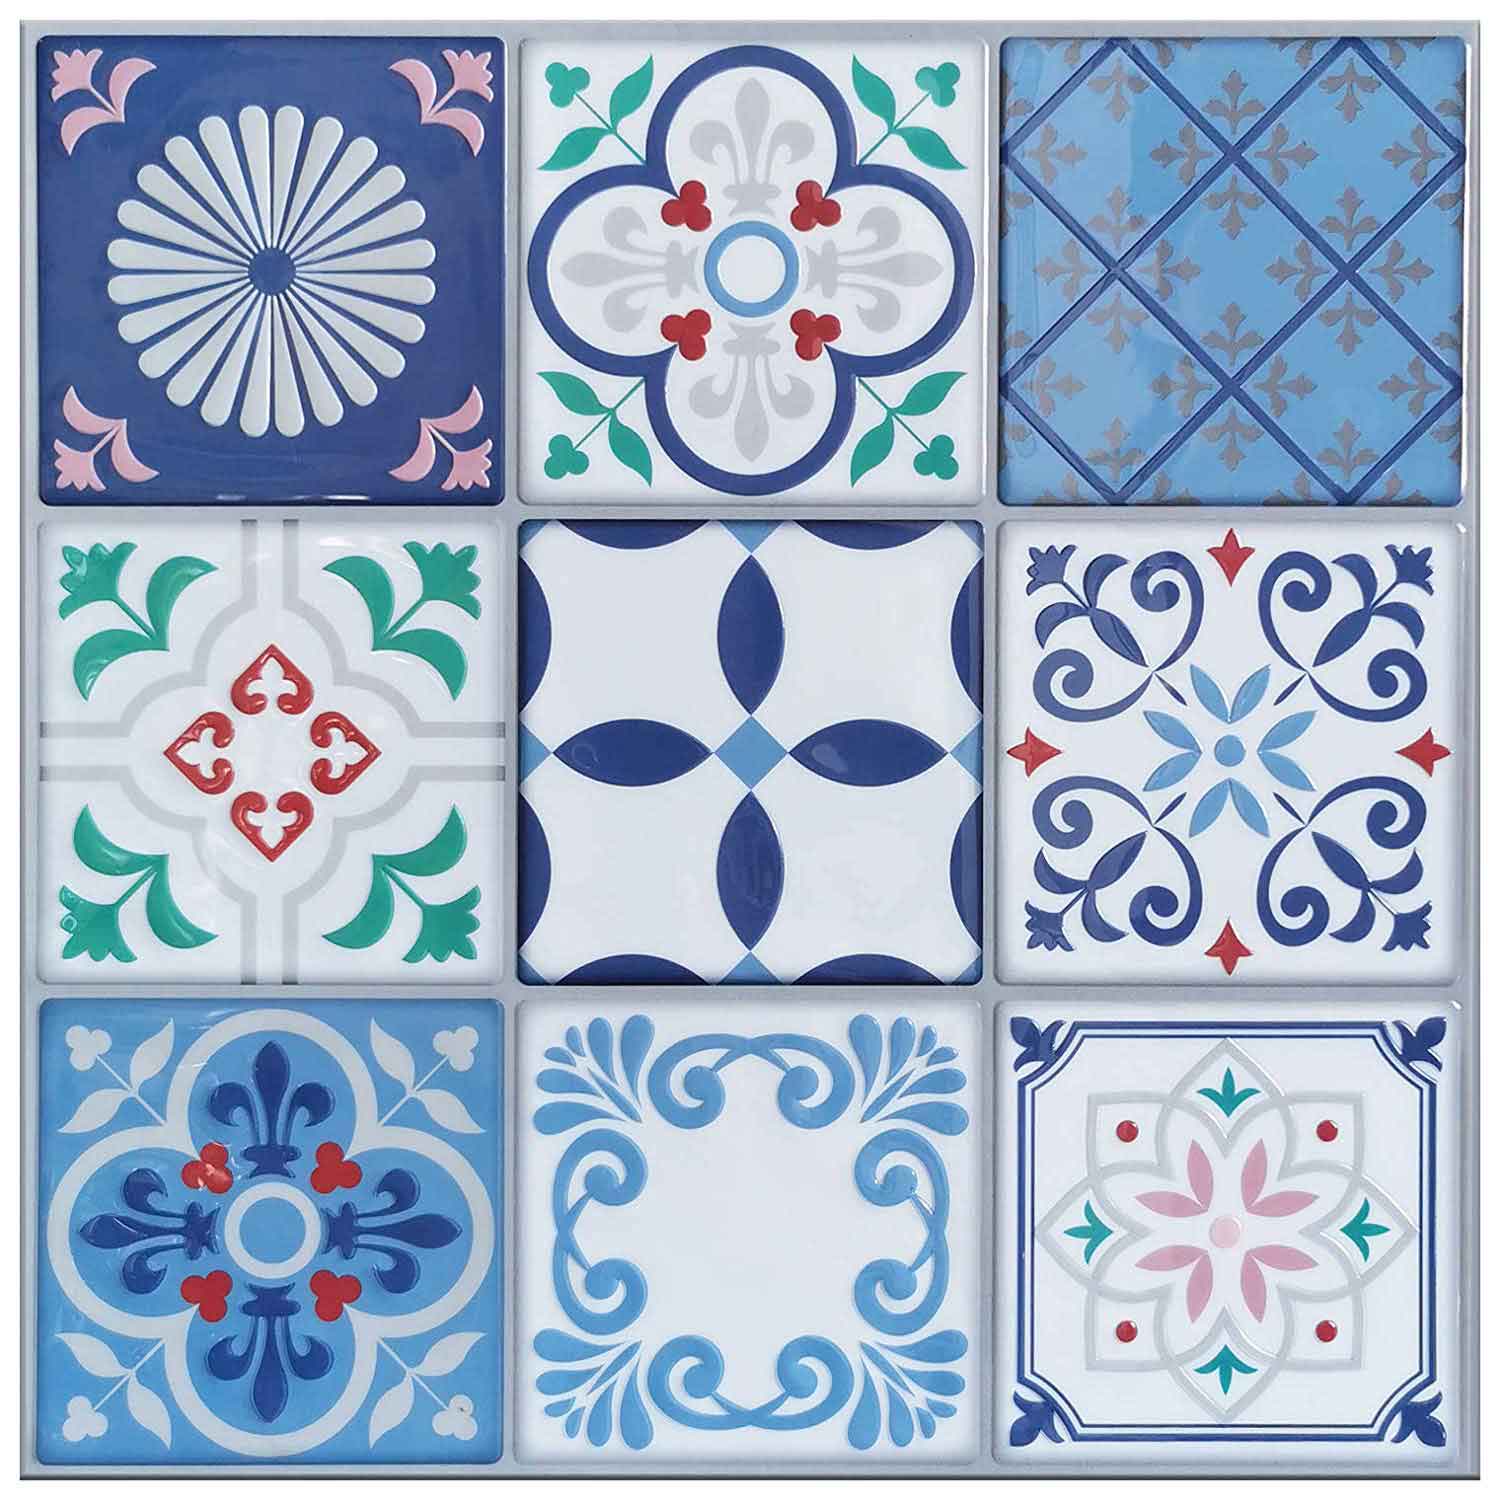 for Kitchen Fireplace and Stair Riser Decal… Art3d Mexican Spanish Talavera Peel and Stick Backsplash Tile Sticker 10pcs of 12x12inches Made of Aluminum PVC Composite Bathroom 